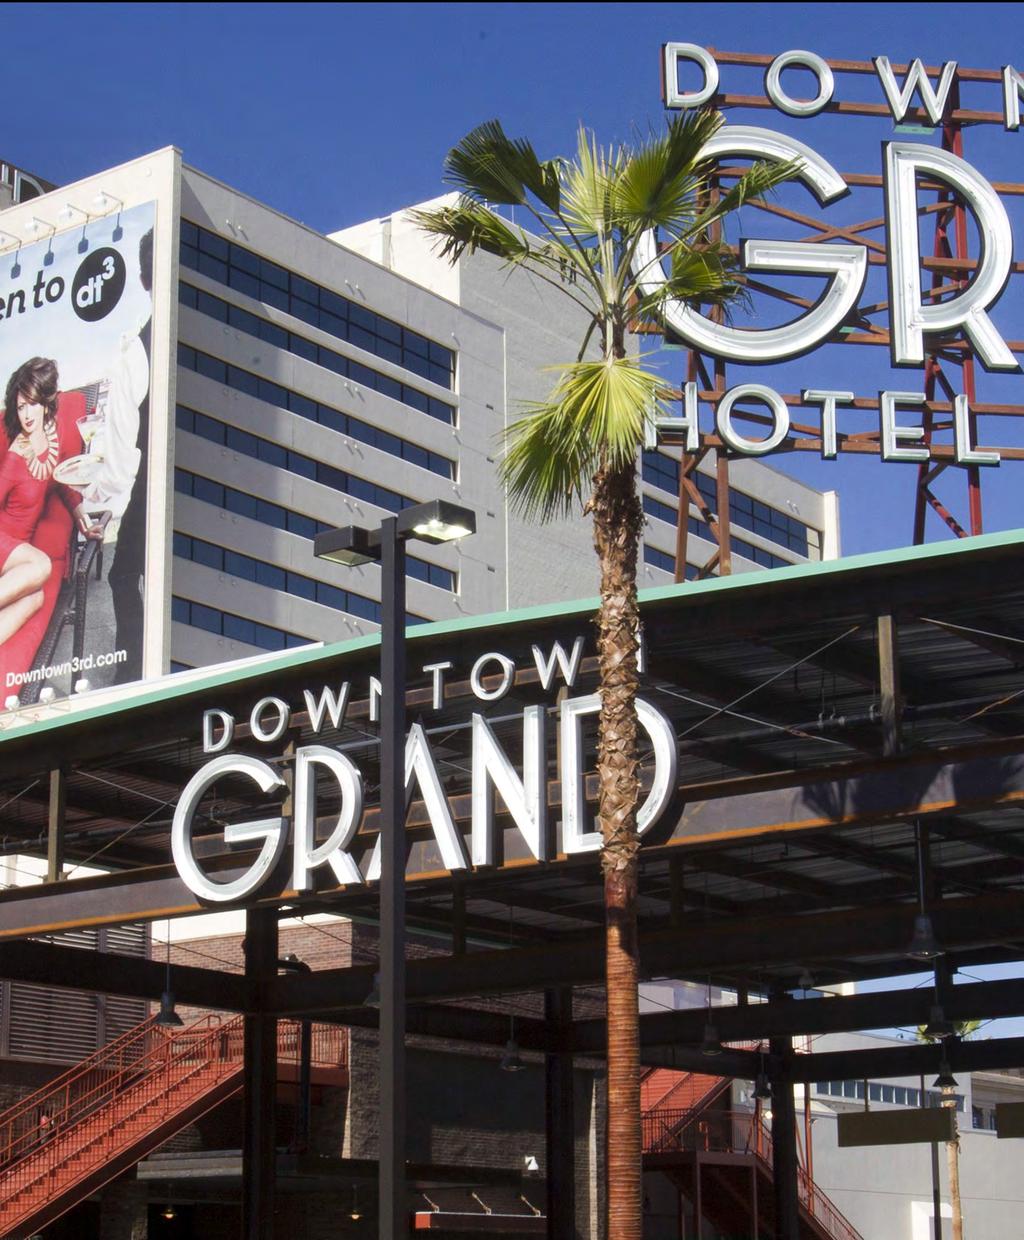 DOWNTOWN GRAND: ESPORTS CASE STUDY In 2016, Las Vegas casino The Downtown Grand took the unprecedented step of converting its high-limit